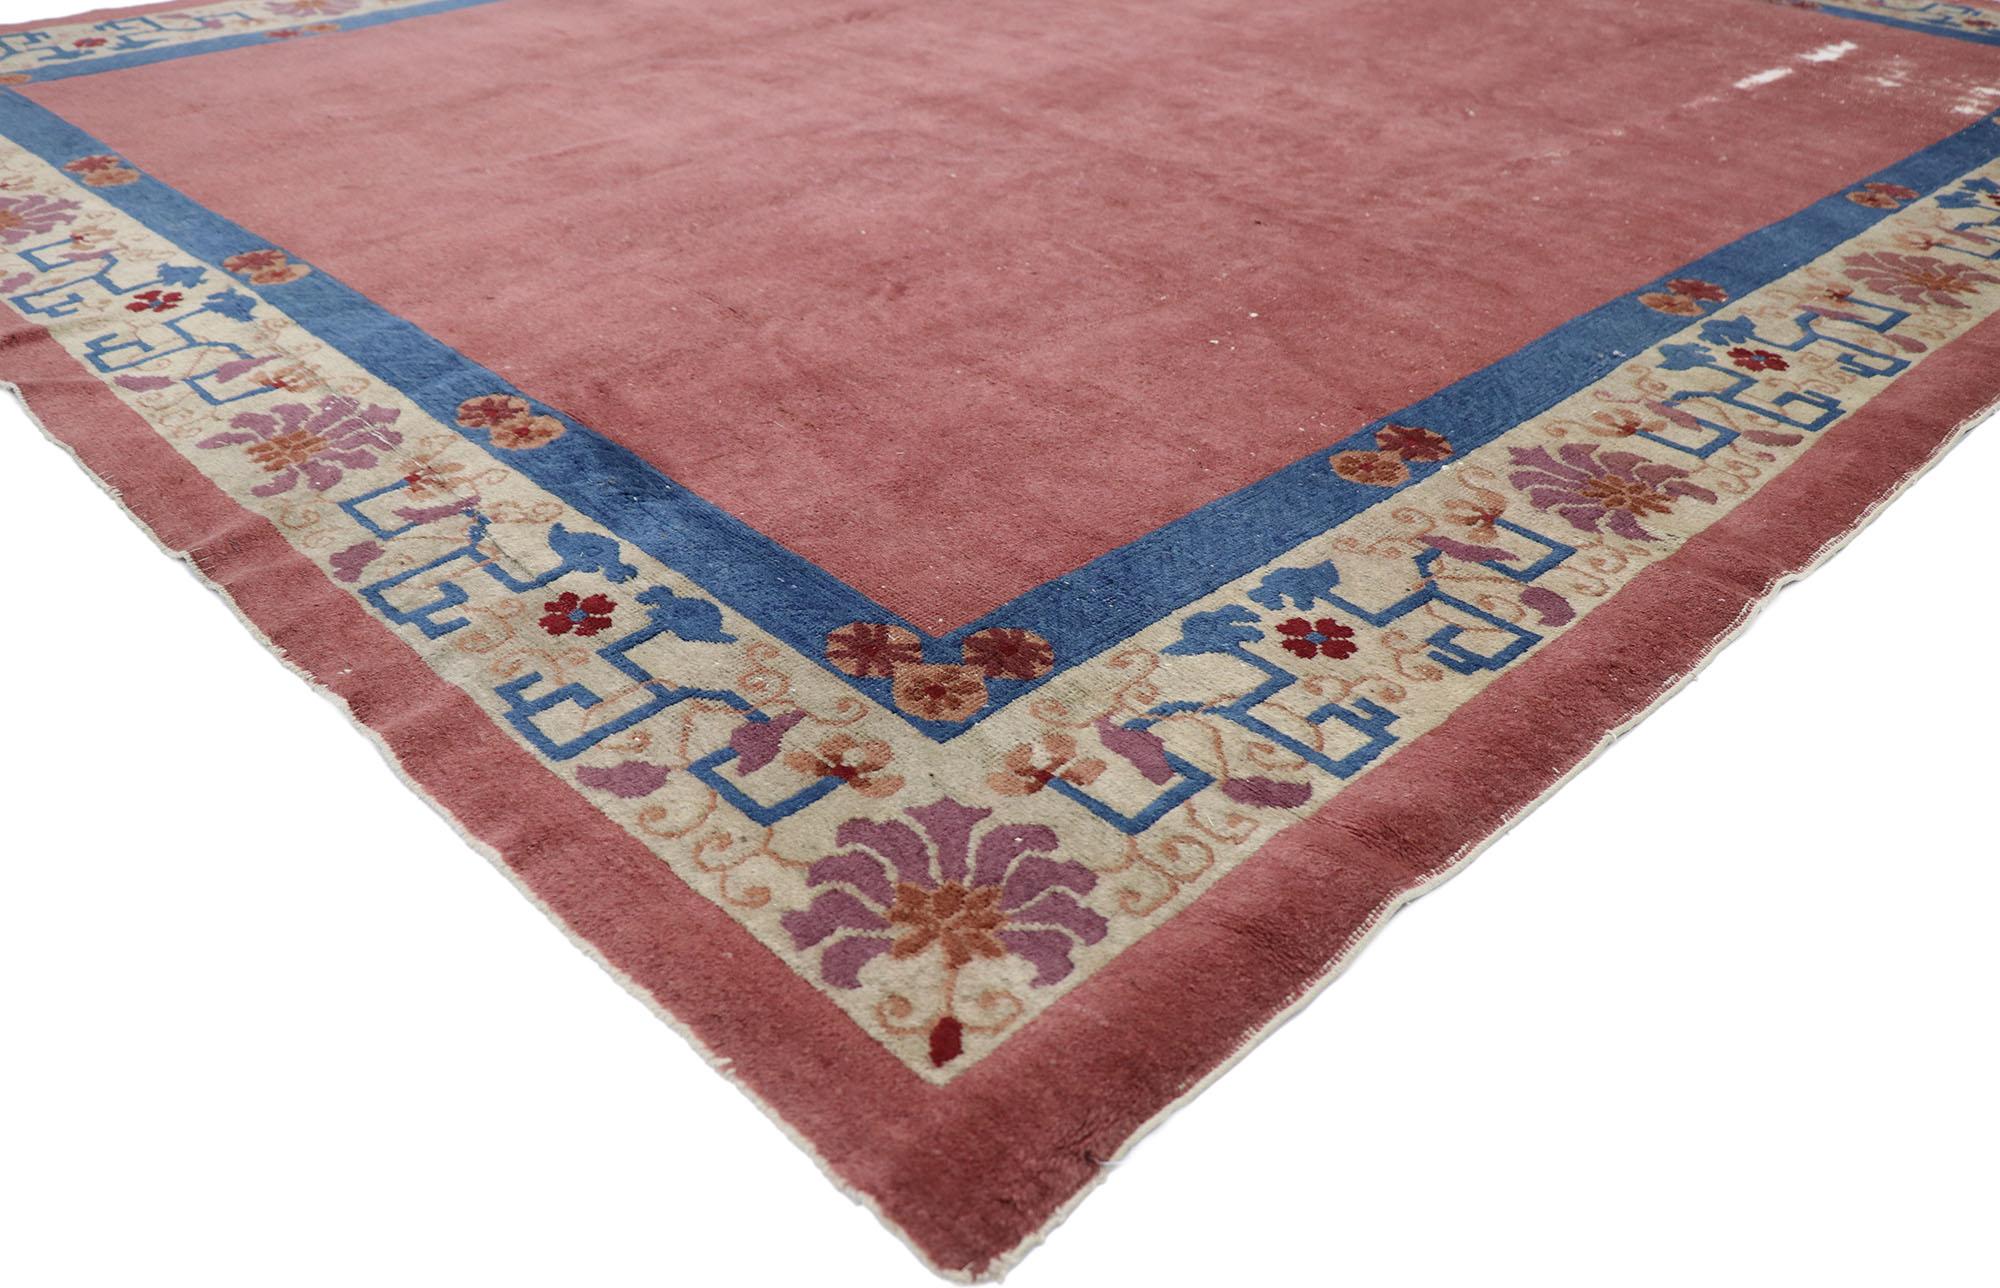 78079 distressed antique Chinese Peking rug with Industrial Art Deco style 08'02 x 09'08. With its effortless beauty and rustic sensibility, this hand-knotted wool distressed antique Chinese Peking rug will take on a curated lived-in look that feels